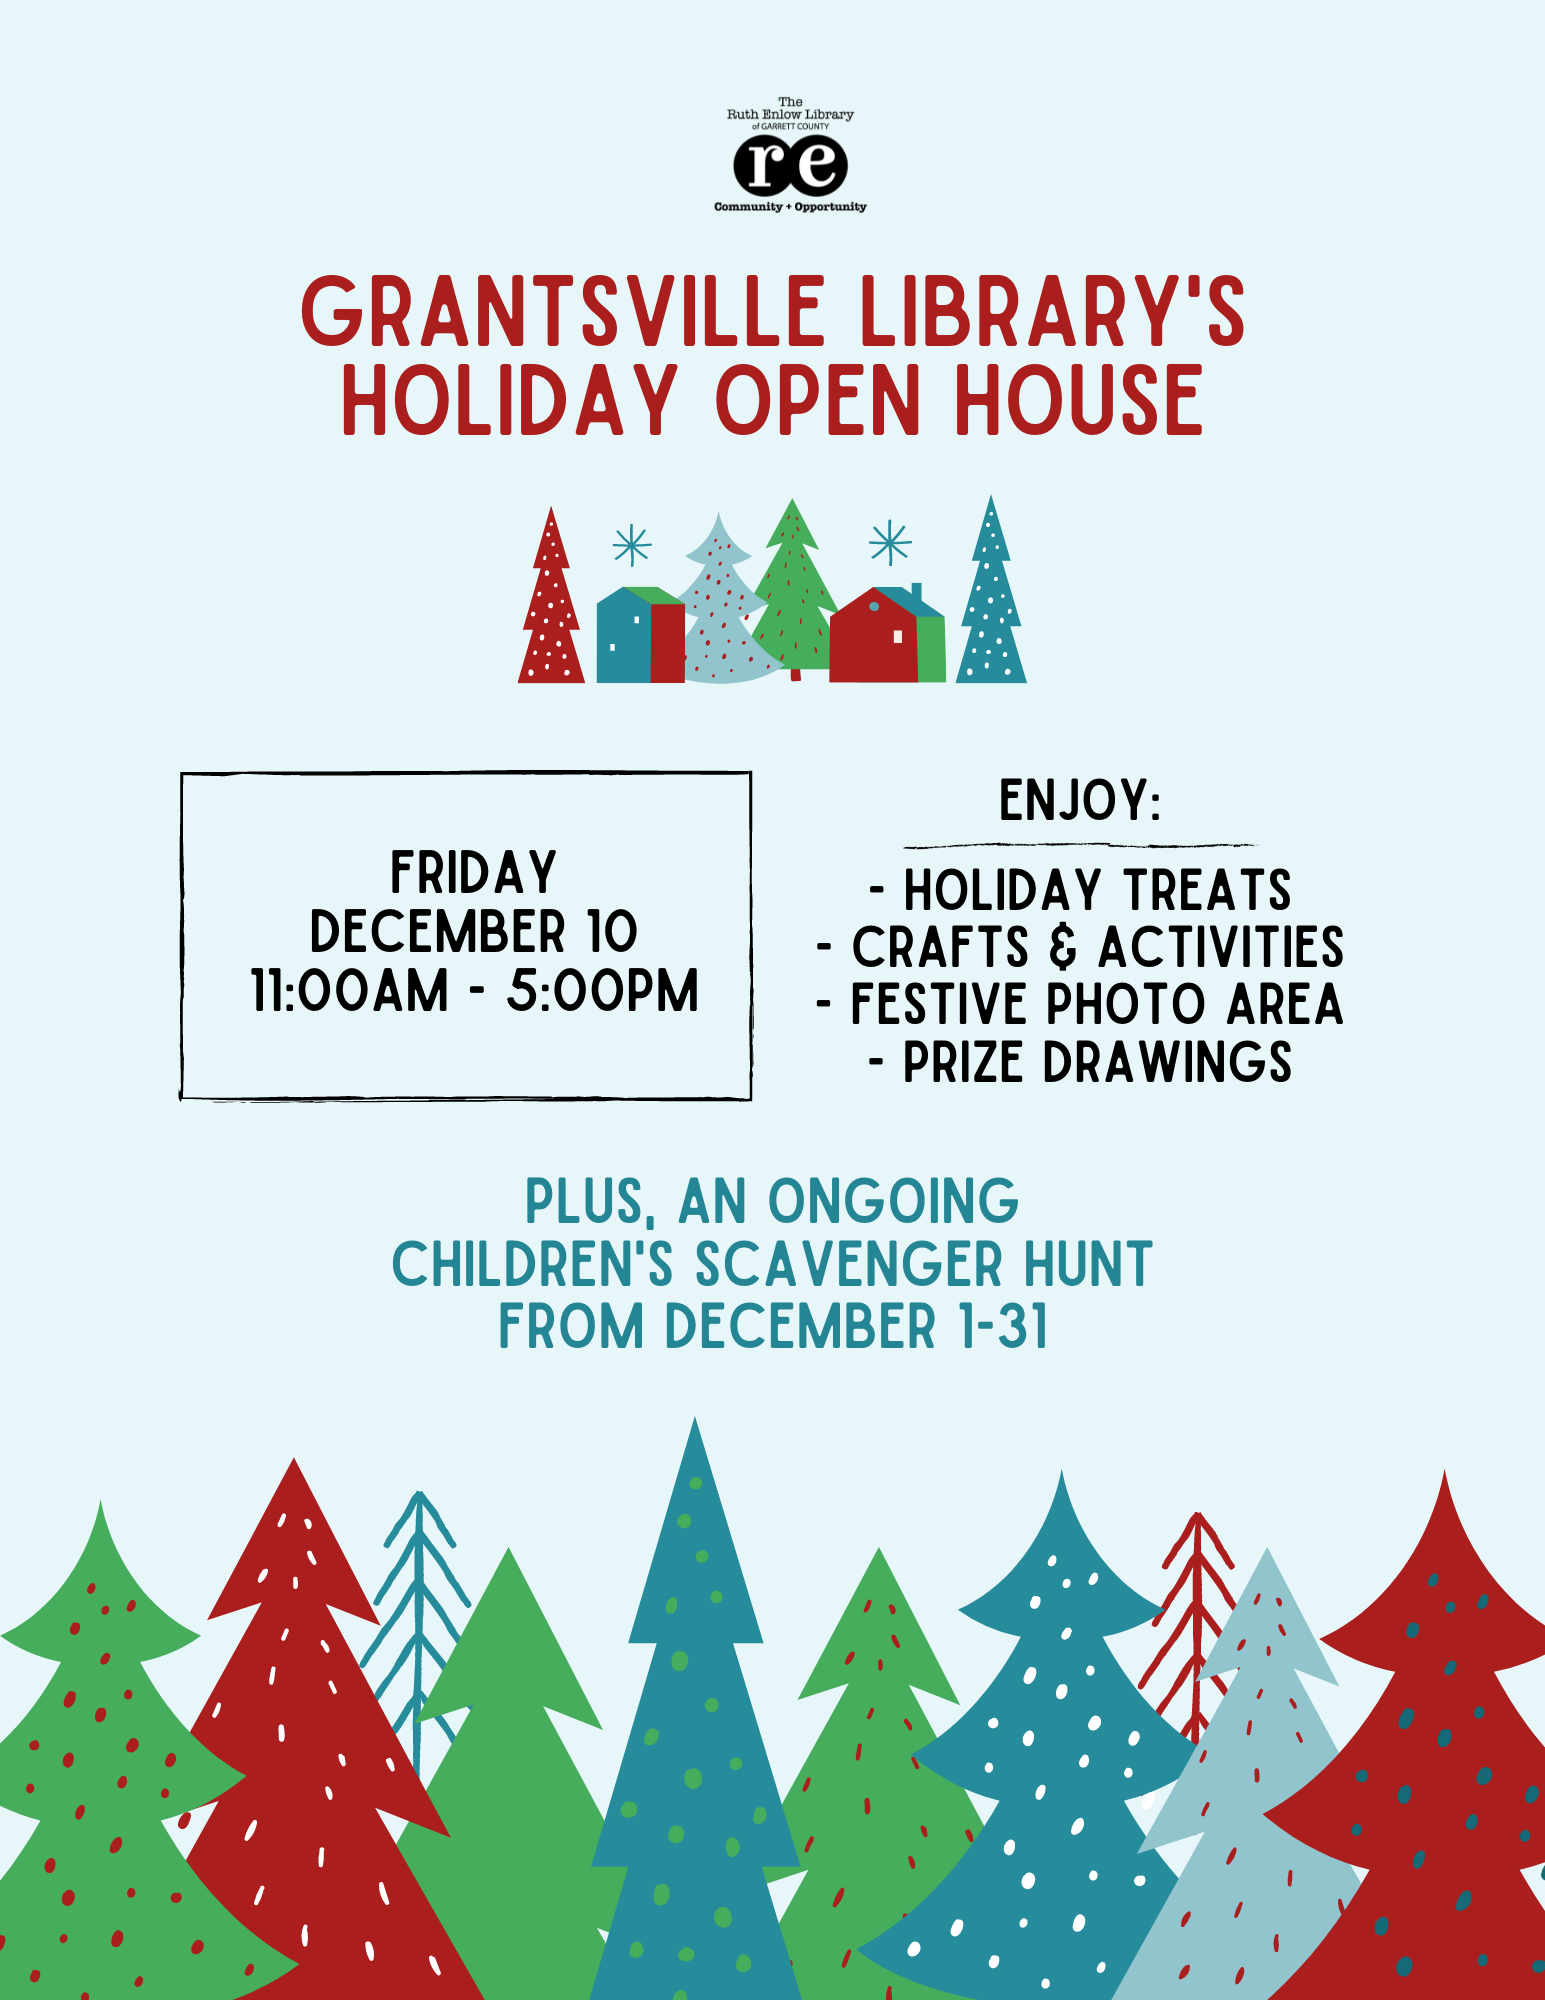 Grantsville Library's Holiday Open House